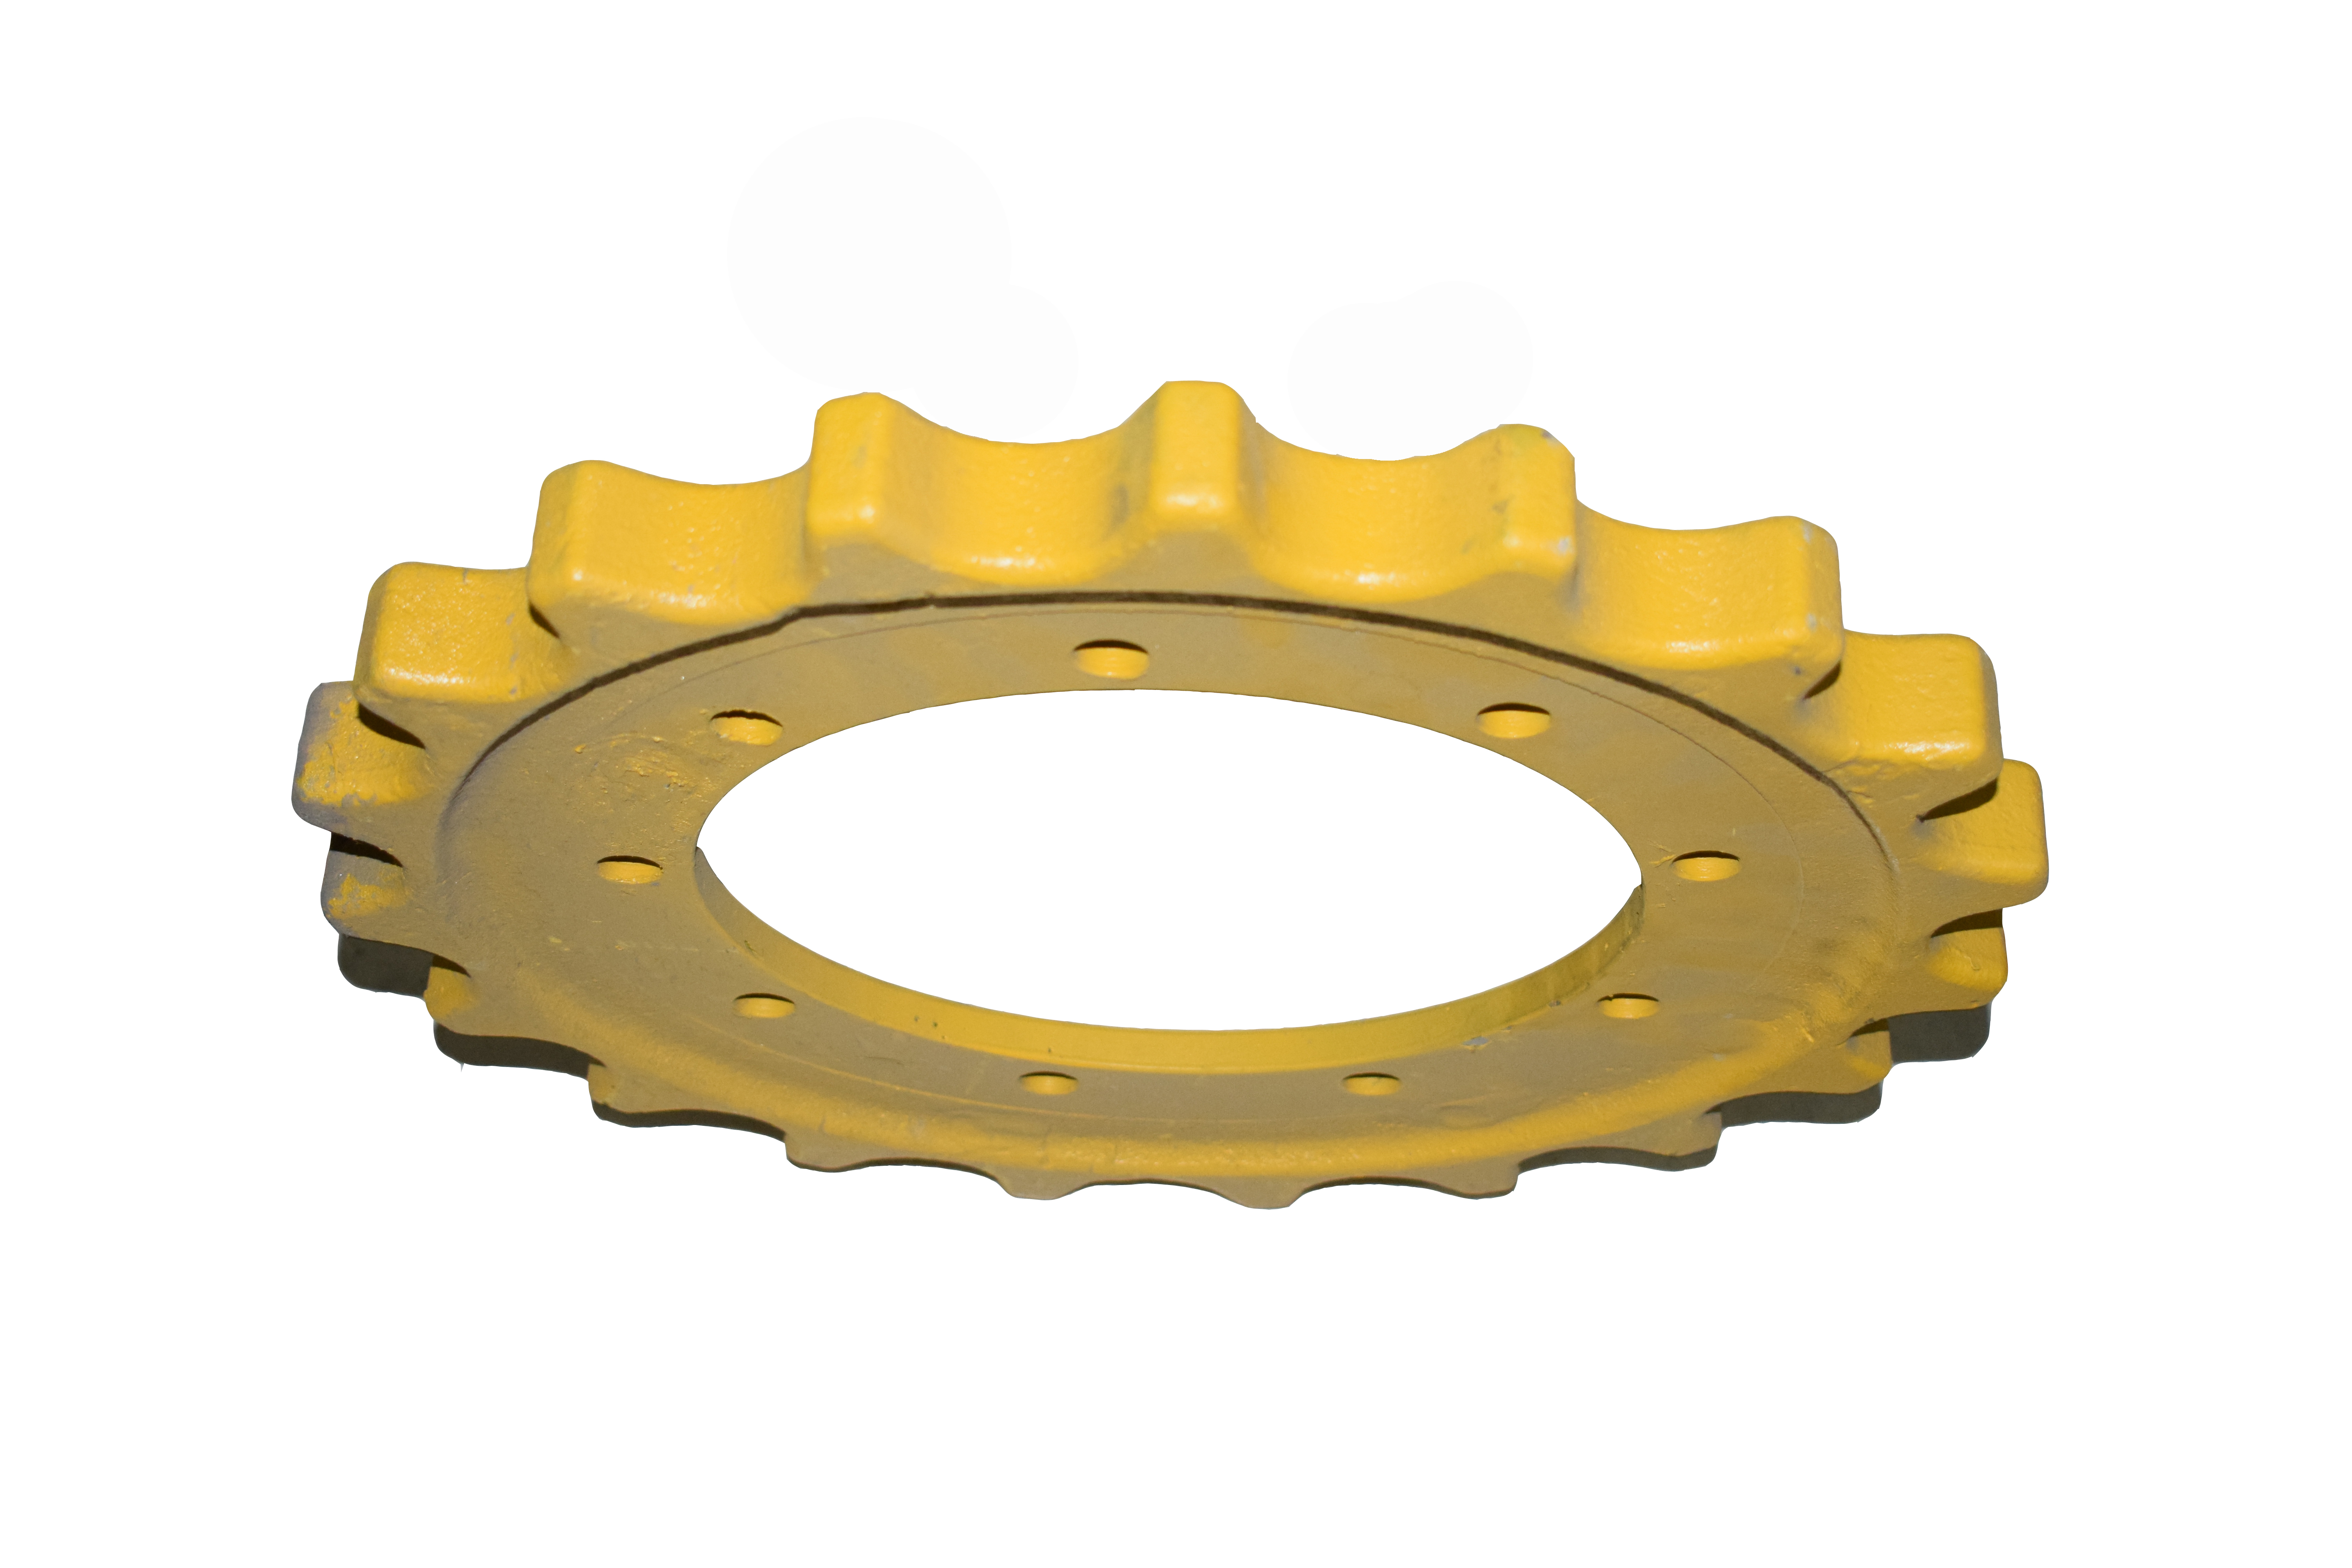 DX225LCA-7M 200108-00008A Sprocket Undercarriage